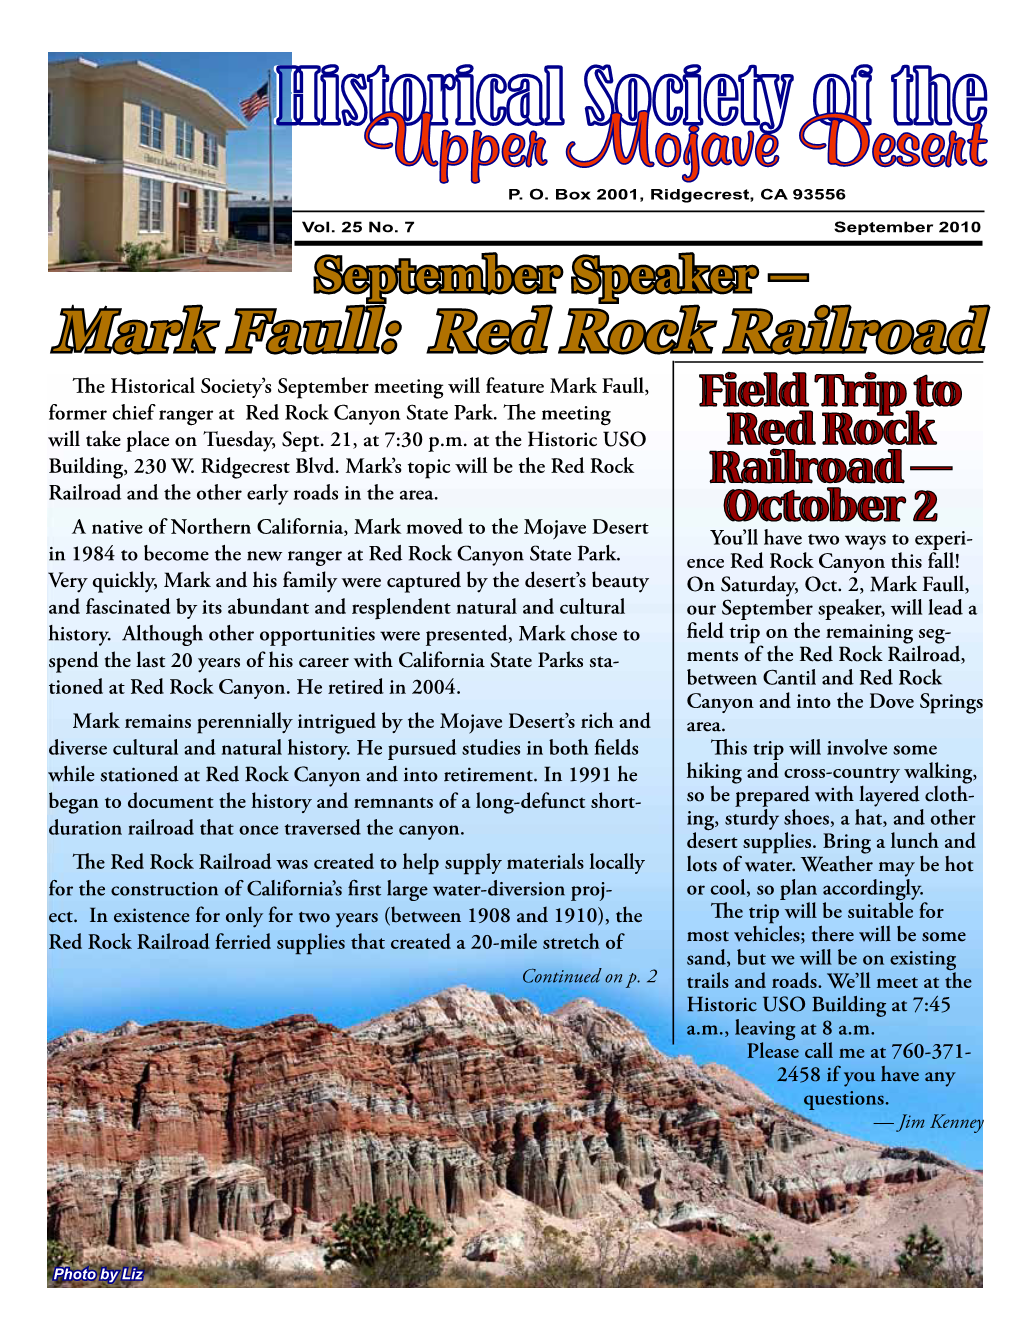 Red Rock Railroad the Historical Society’S September Meeting Will Feature Mark Faull, Former Chief Ranger at Red Rock Canyon State Park